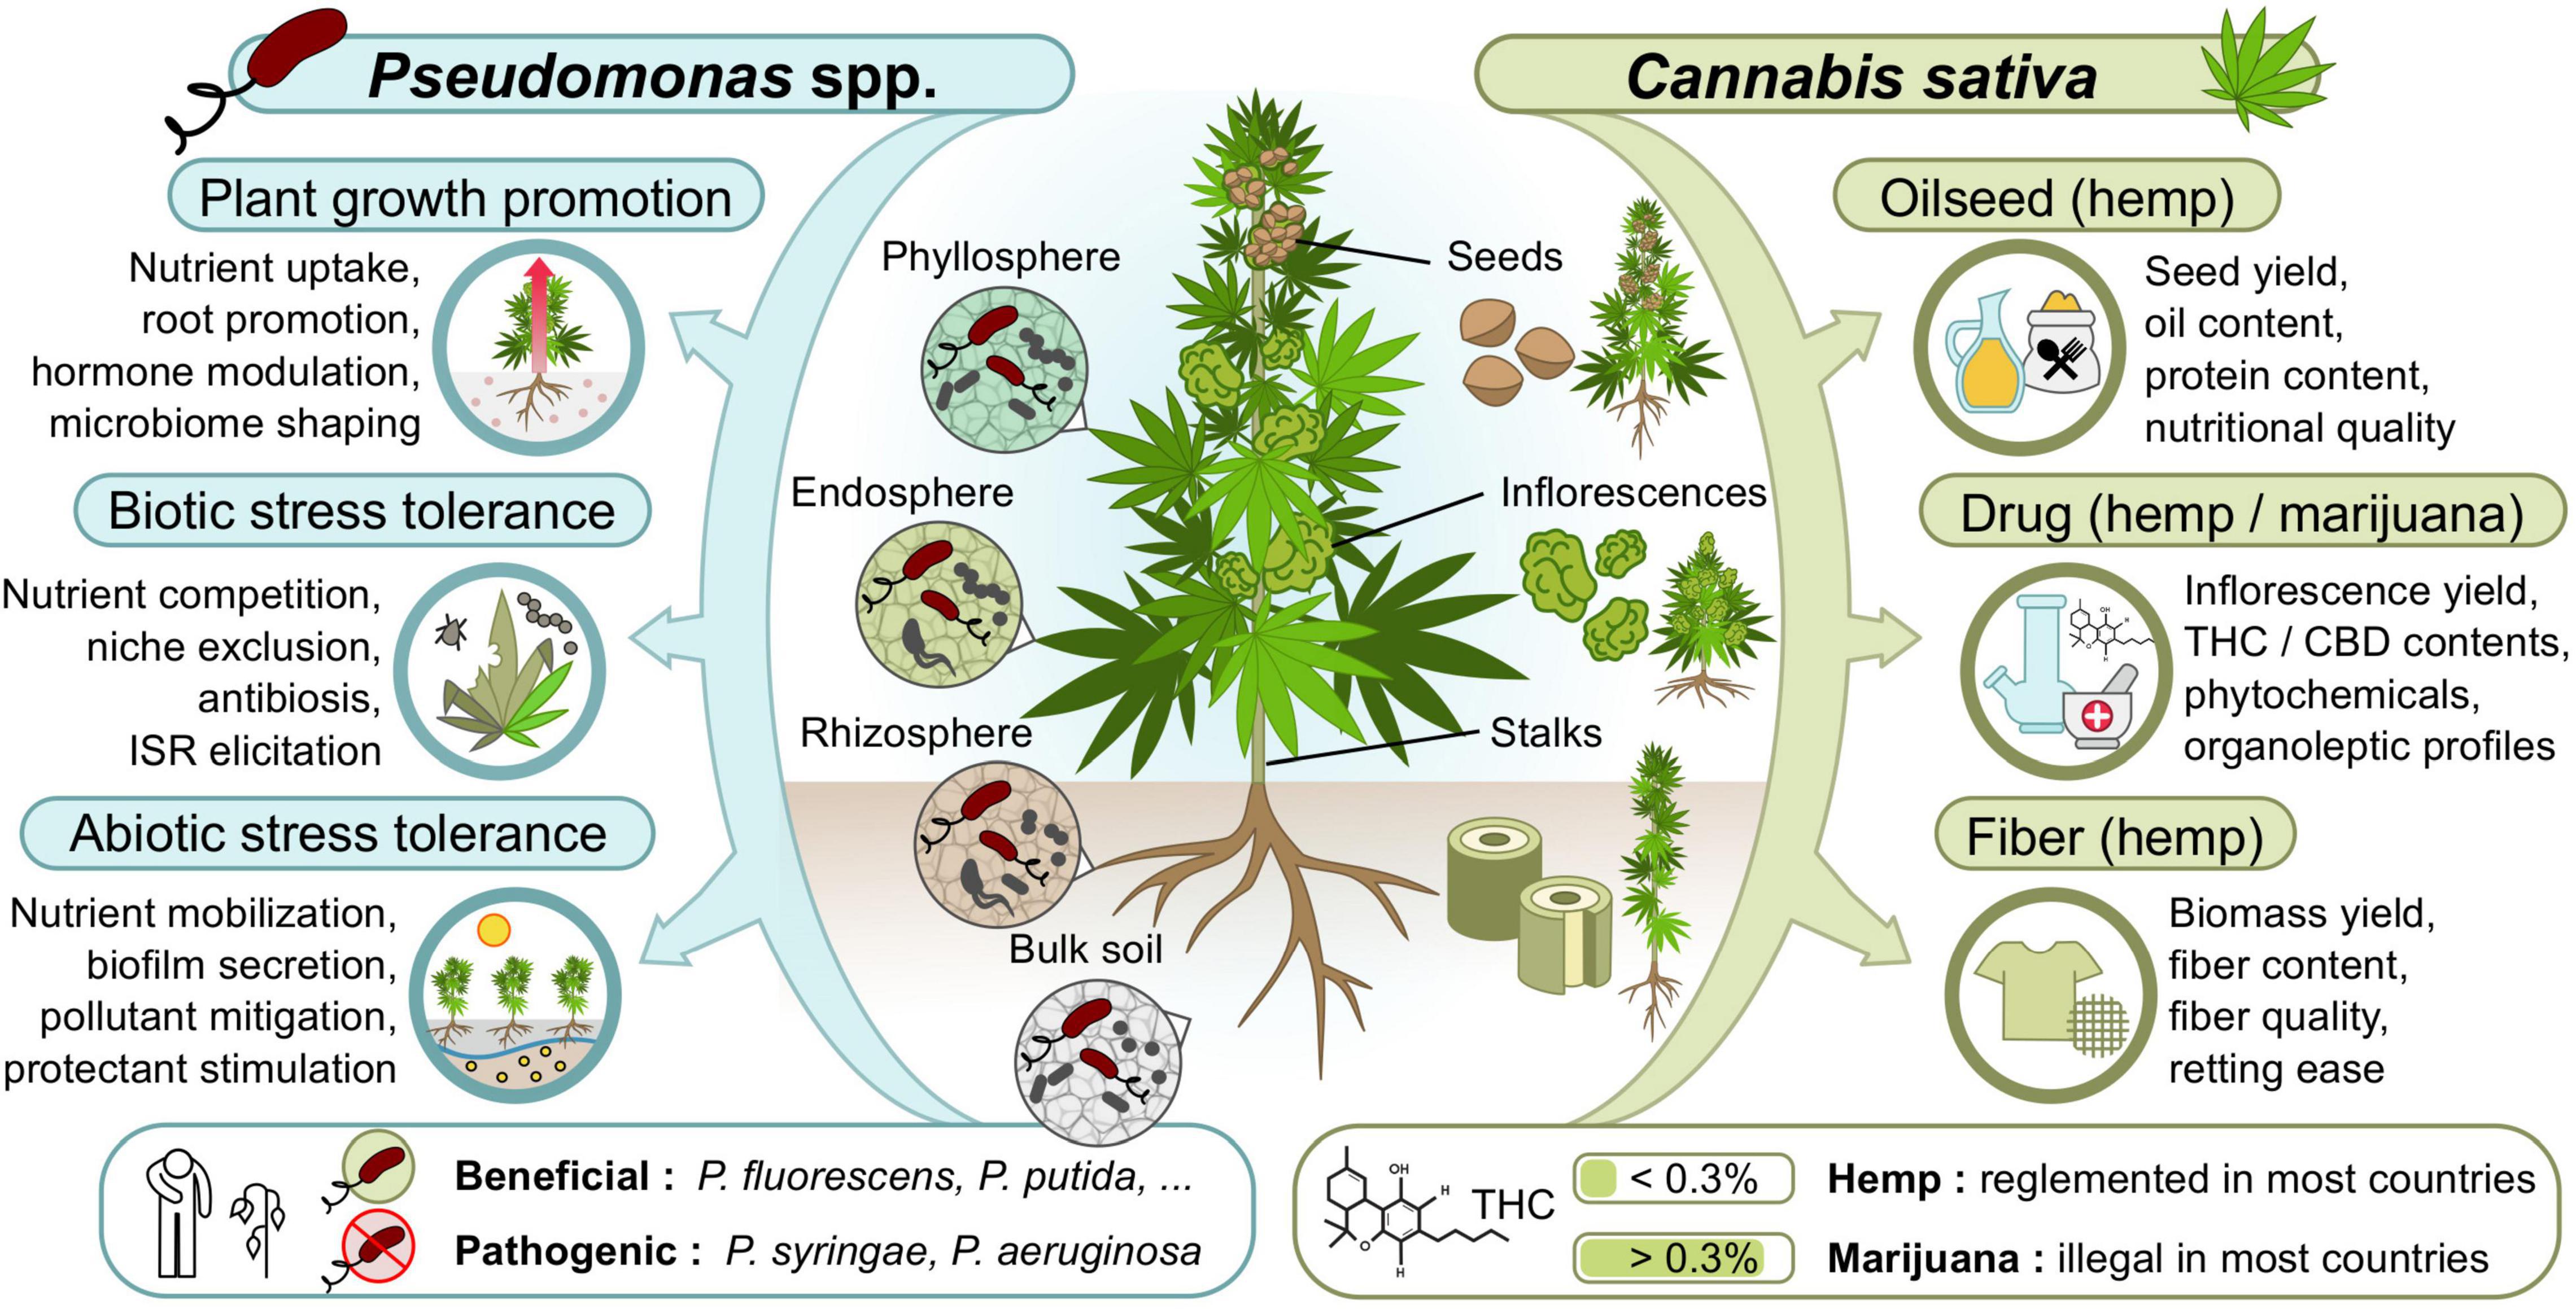 Frontiers  Exploiting Beneficial Pseudomonas spp. for Cannabis Production